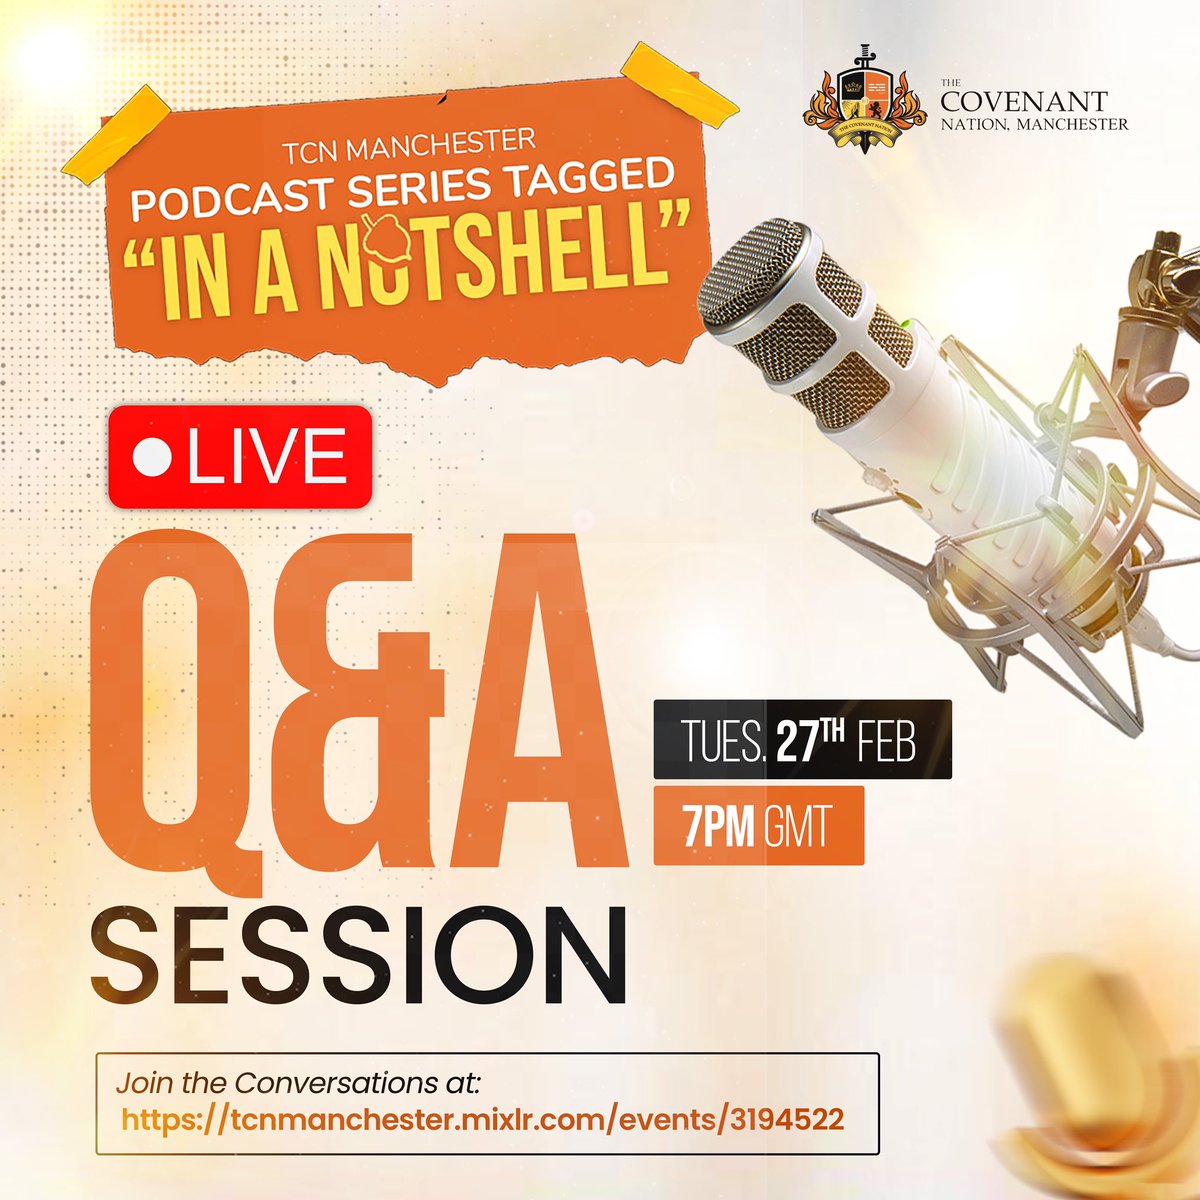 Join us for a live Q&A session on our Podcast Series today! 

Let's connect, inspire, and learn together. 
See you there!

Join the conversations at tcnmanchester.mixlr.com/events/3194522

7pm GMT 

#tcnmanchester #inanutshell #hearingfromGod #podcast